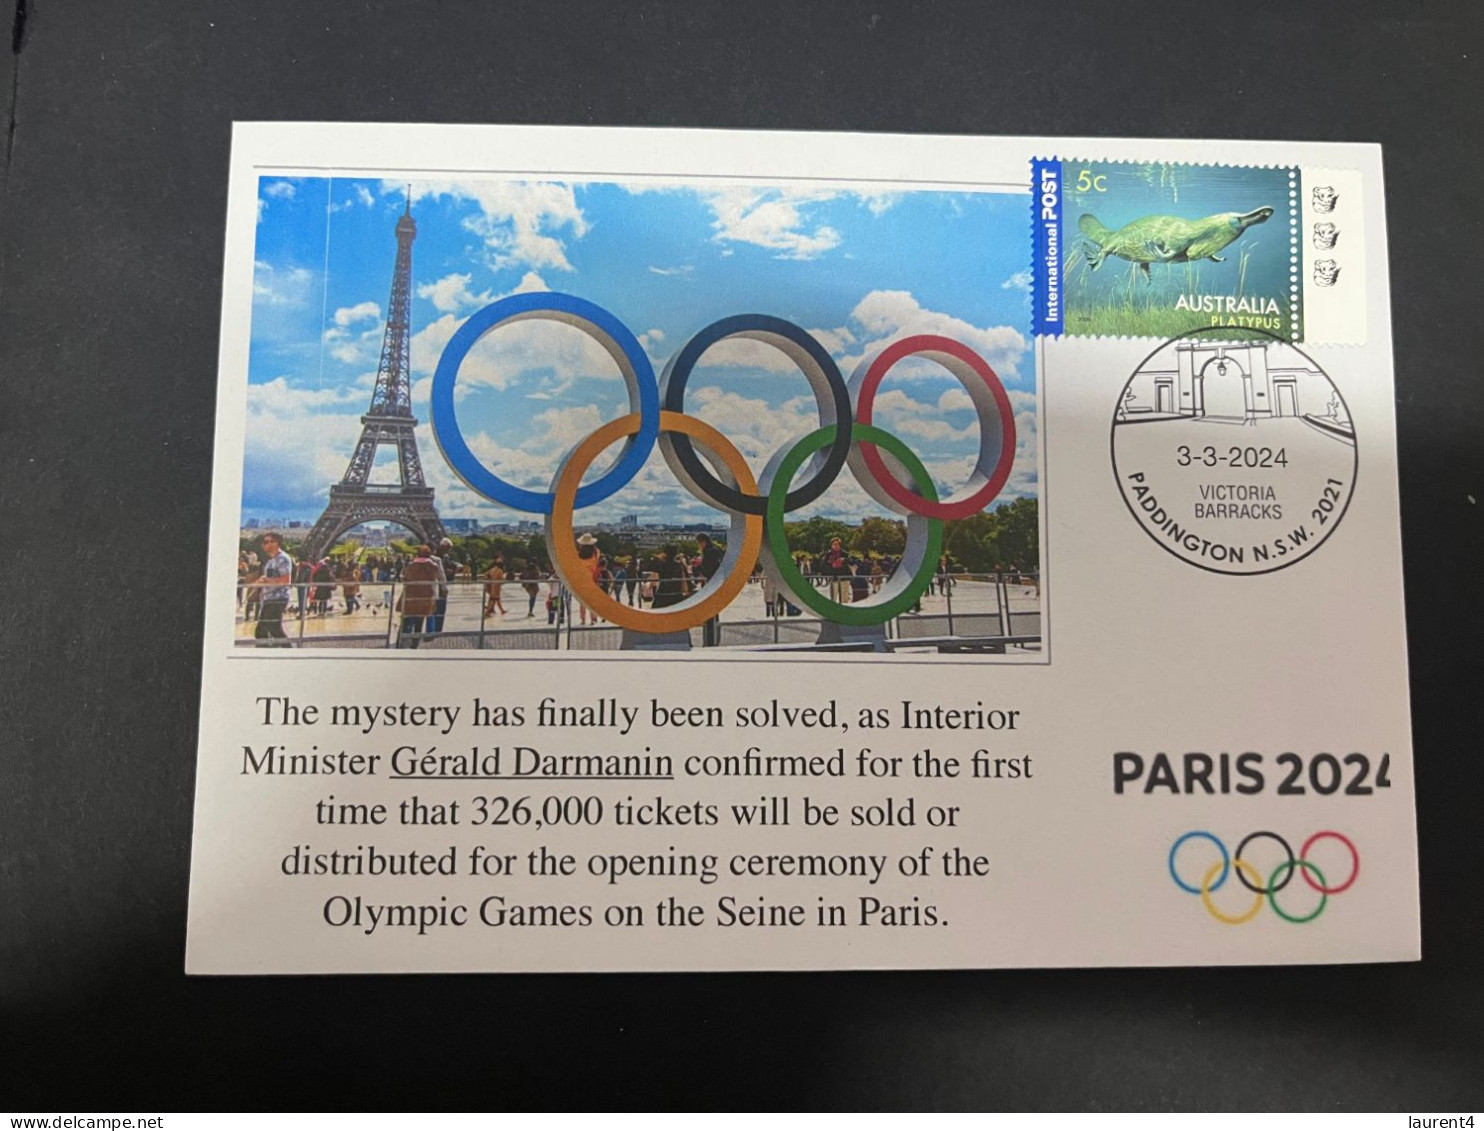 7-3-2024 (2 Y 22) Paris 2024 Summer Olympic - 326,000 Tickets Available To The Games Opening Ceremony On Seine River - Sommer 2024: Paris